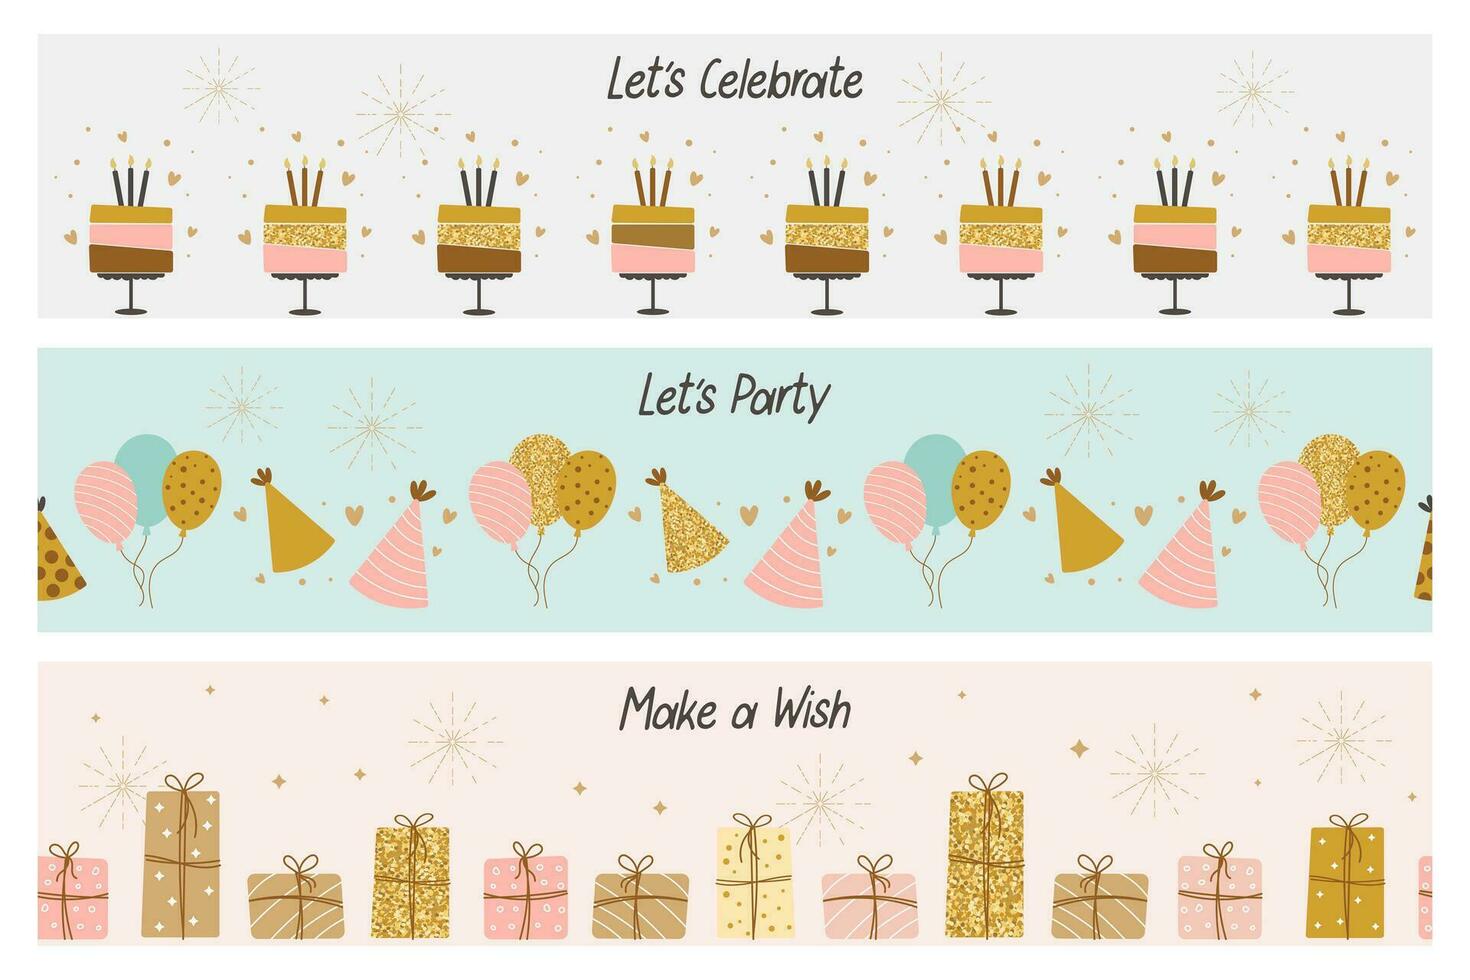 Happy birthday banners template set. Seamless borders. Cakes, balloons, gifts and party hats with calligraphy. Festive backgrounds in a simple style. Vector